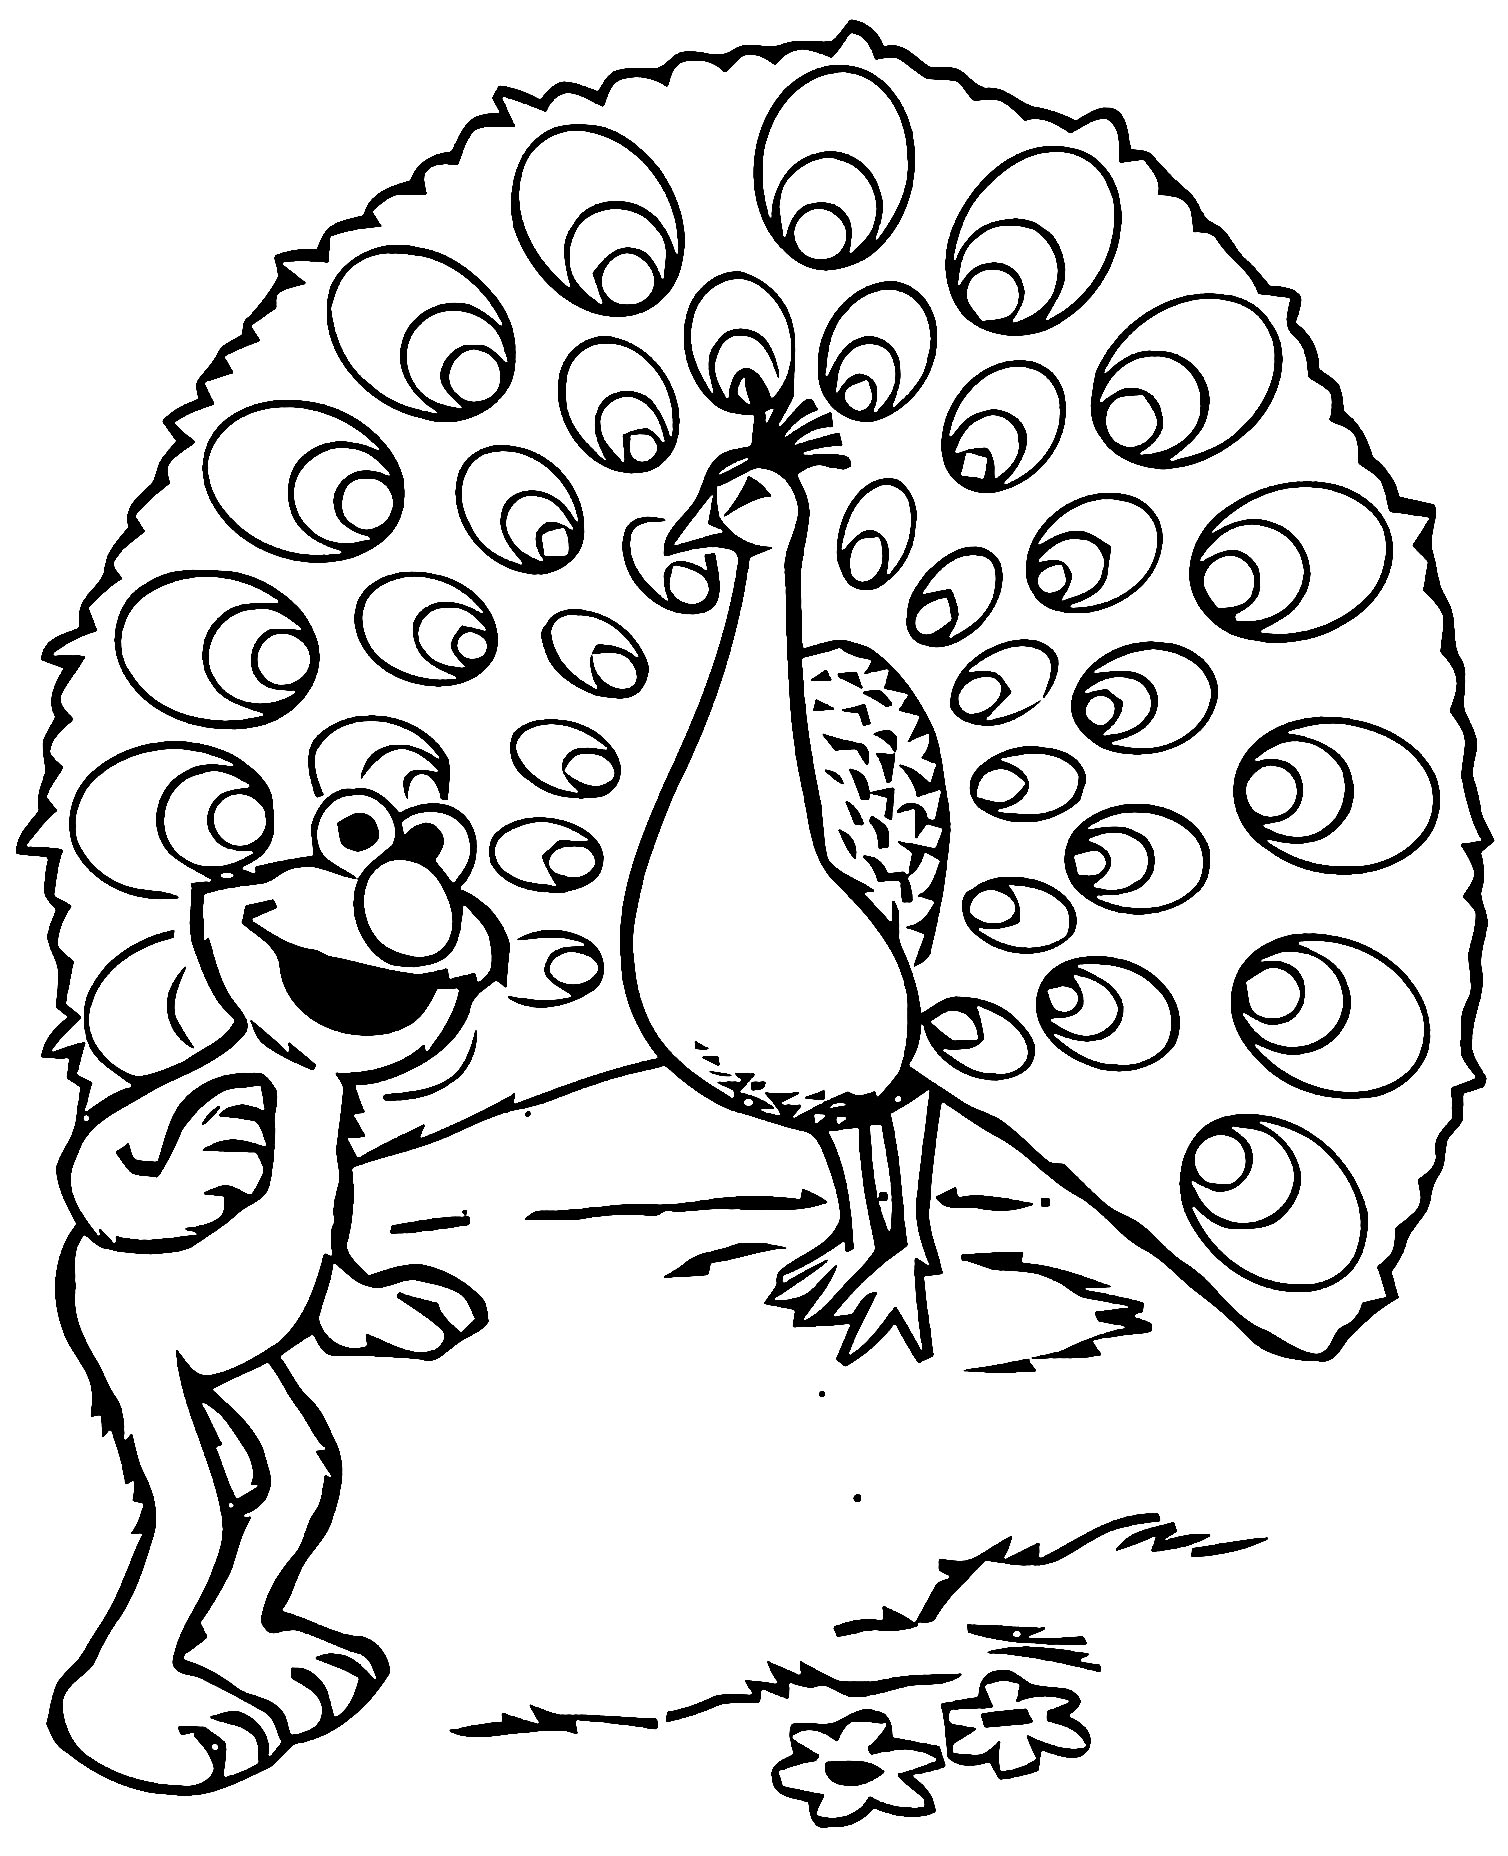 Peacocks coloring page to download